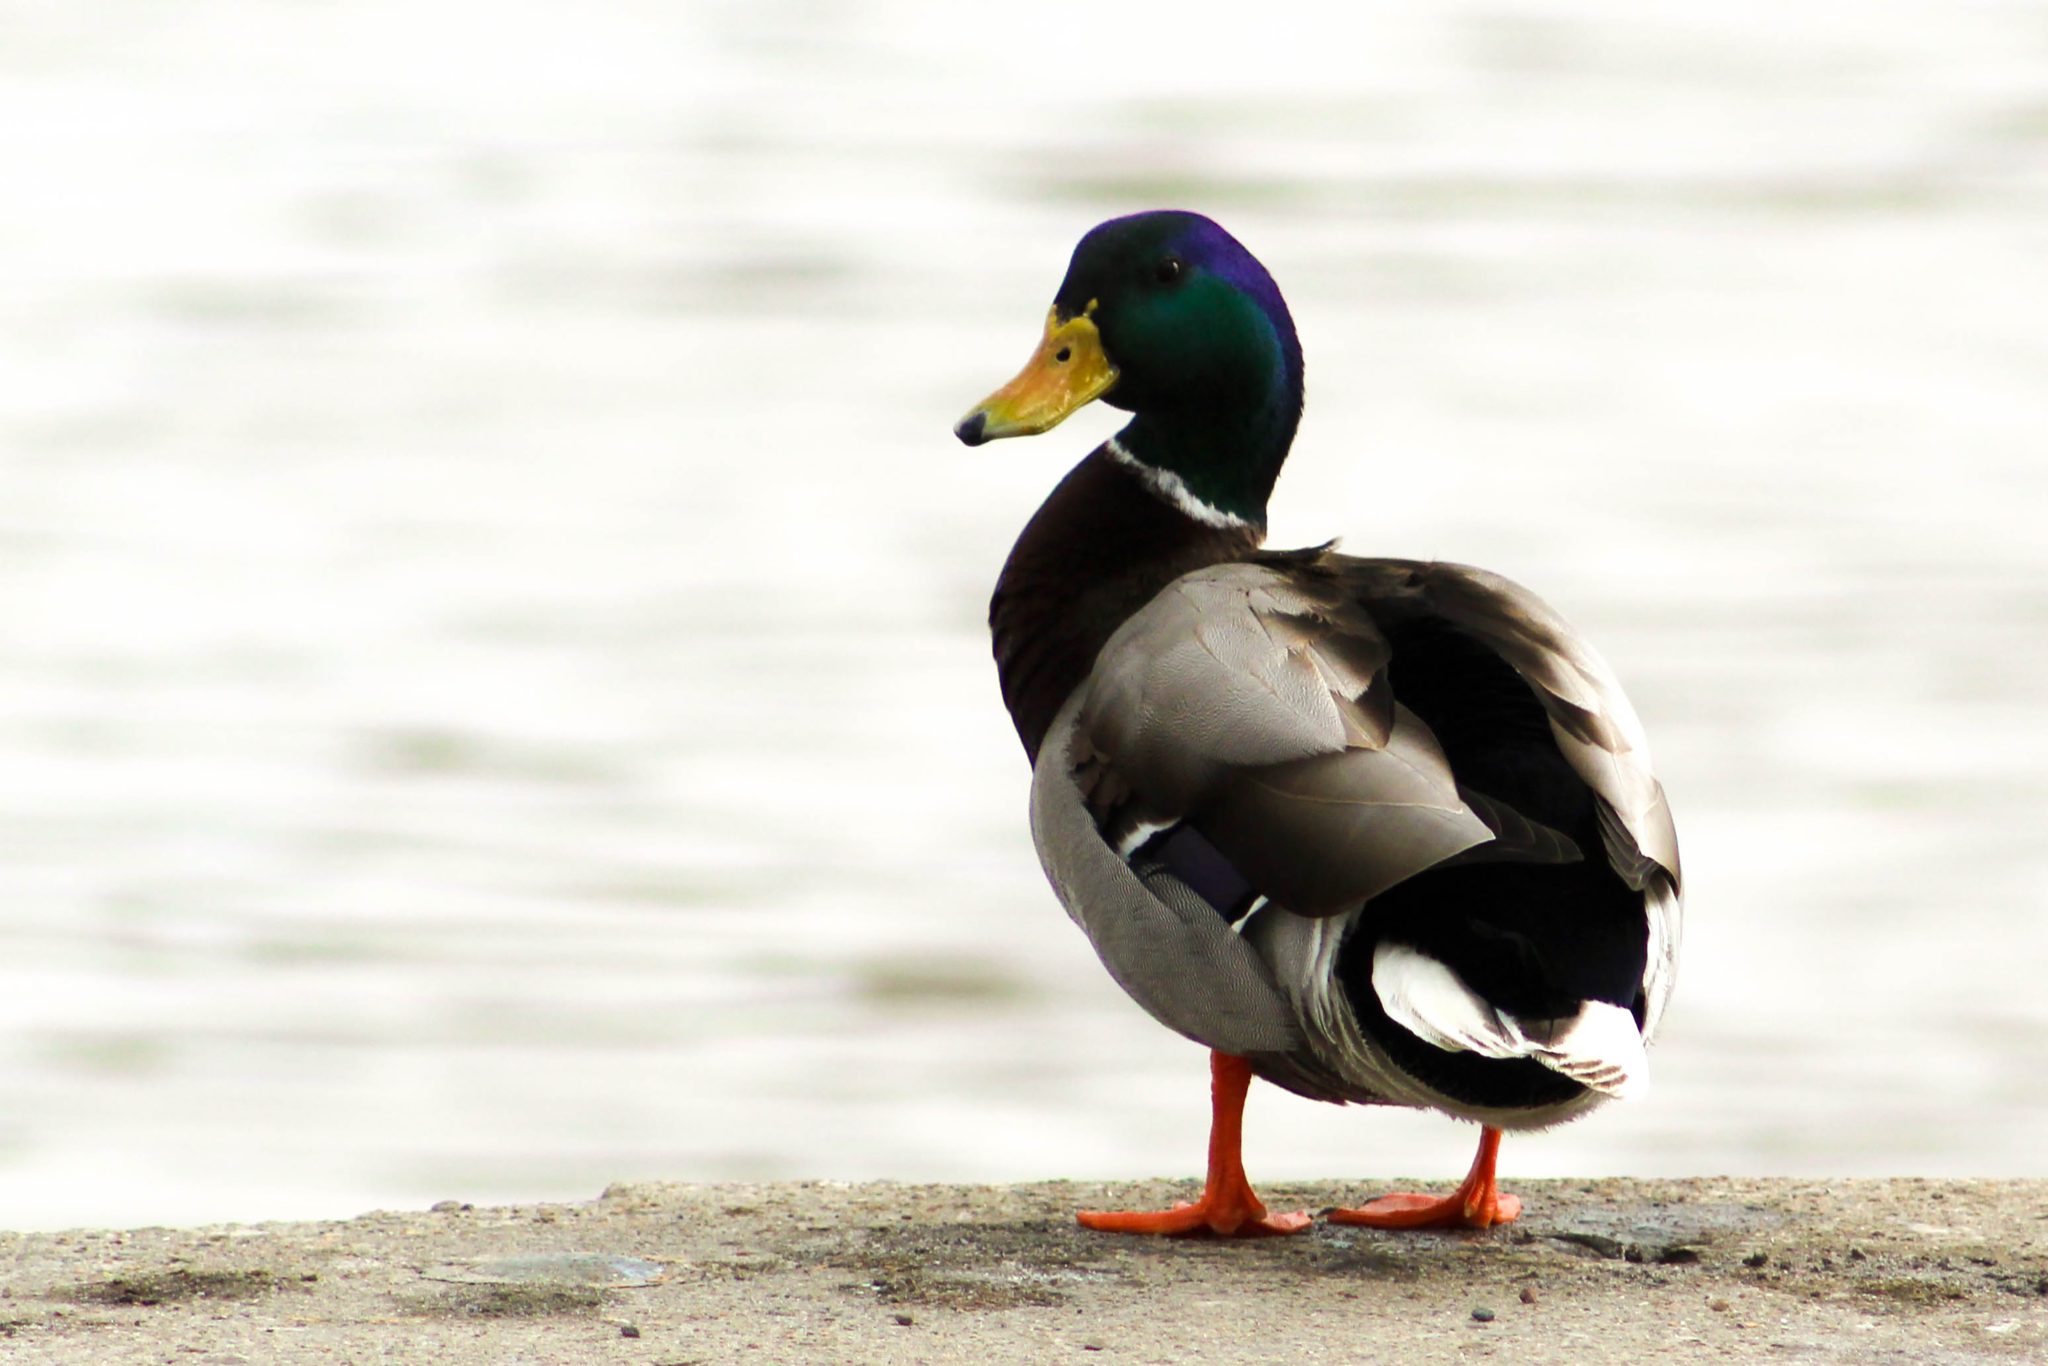 A mallard duck wanders around the dock at the Port of Rochester where the Genesee River meets Lake Ontario. Rochester, New York, USA